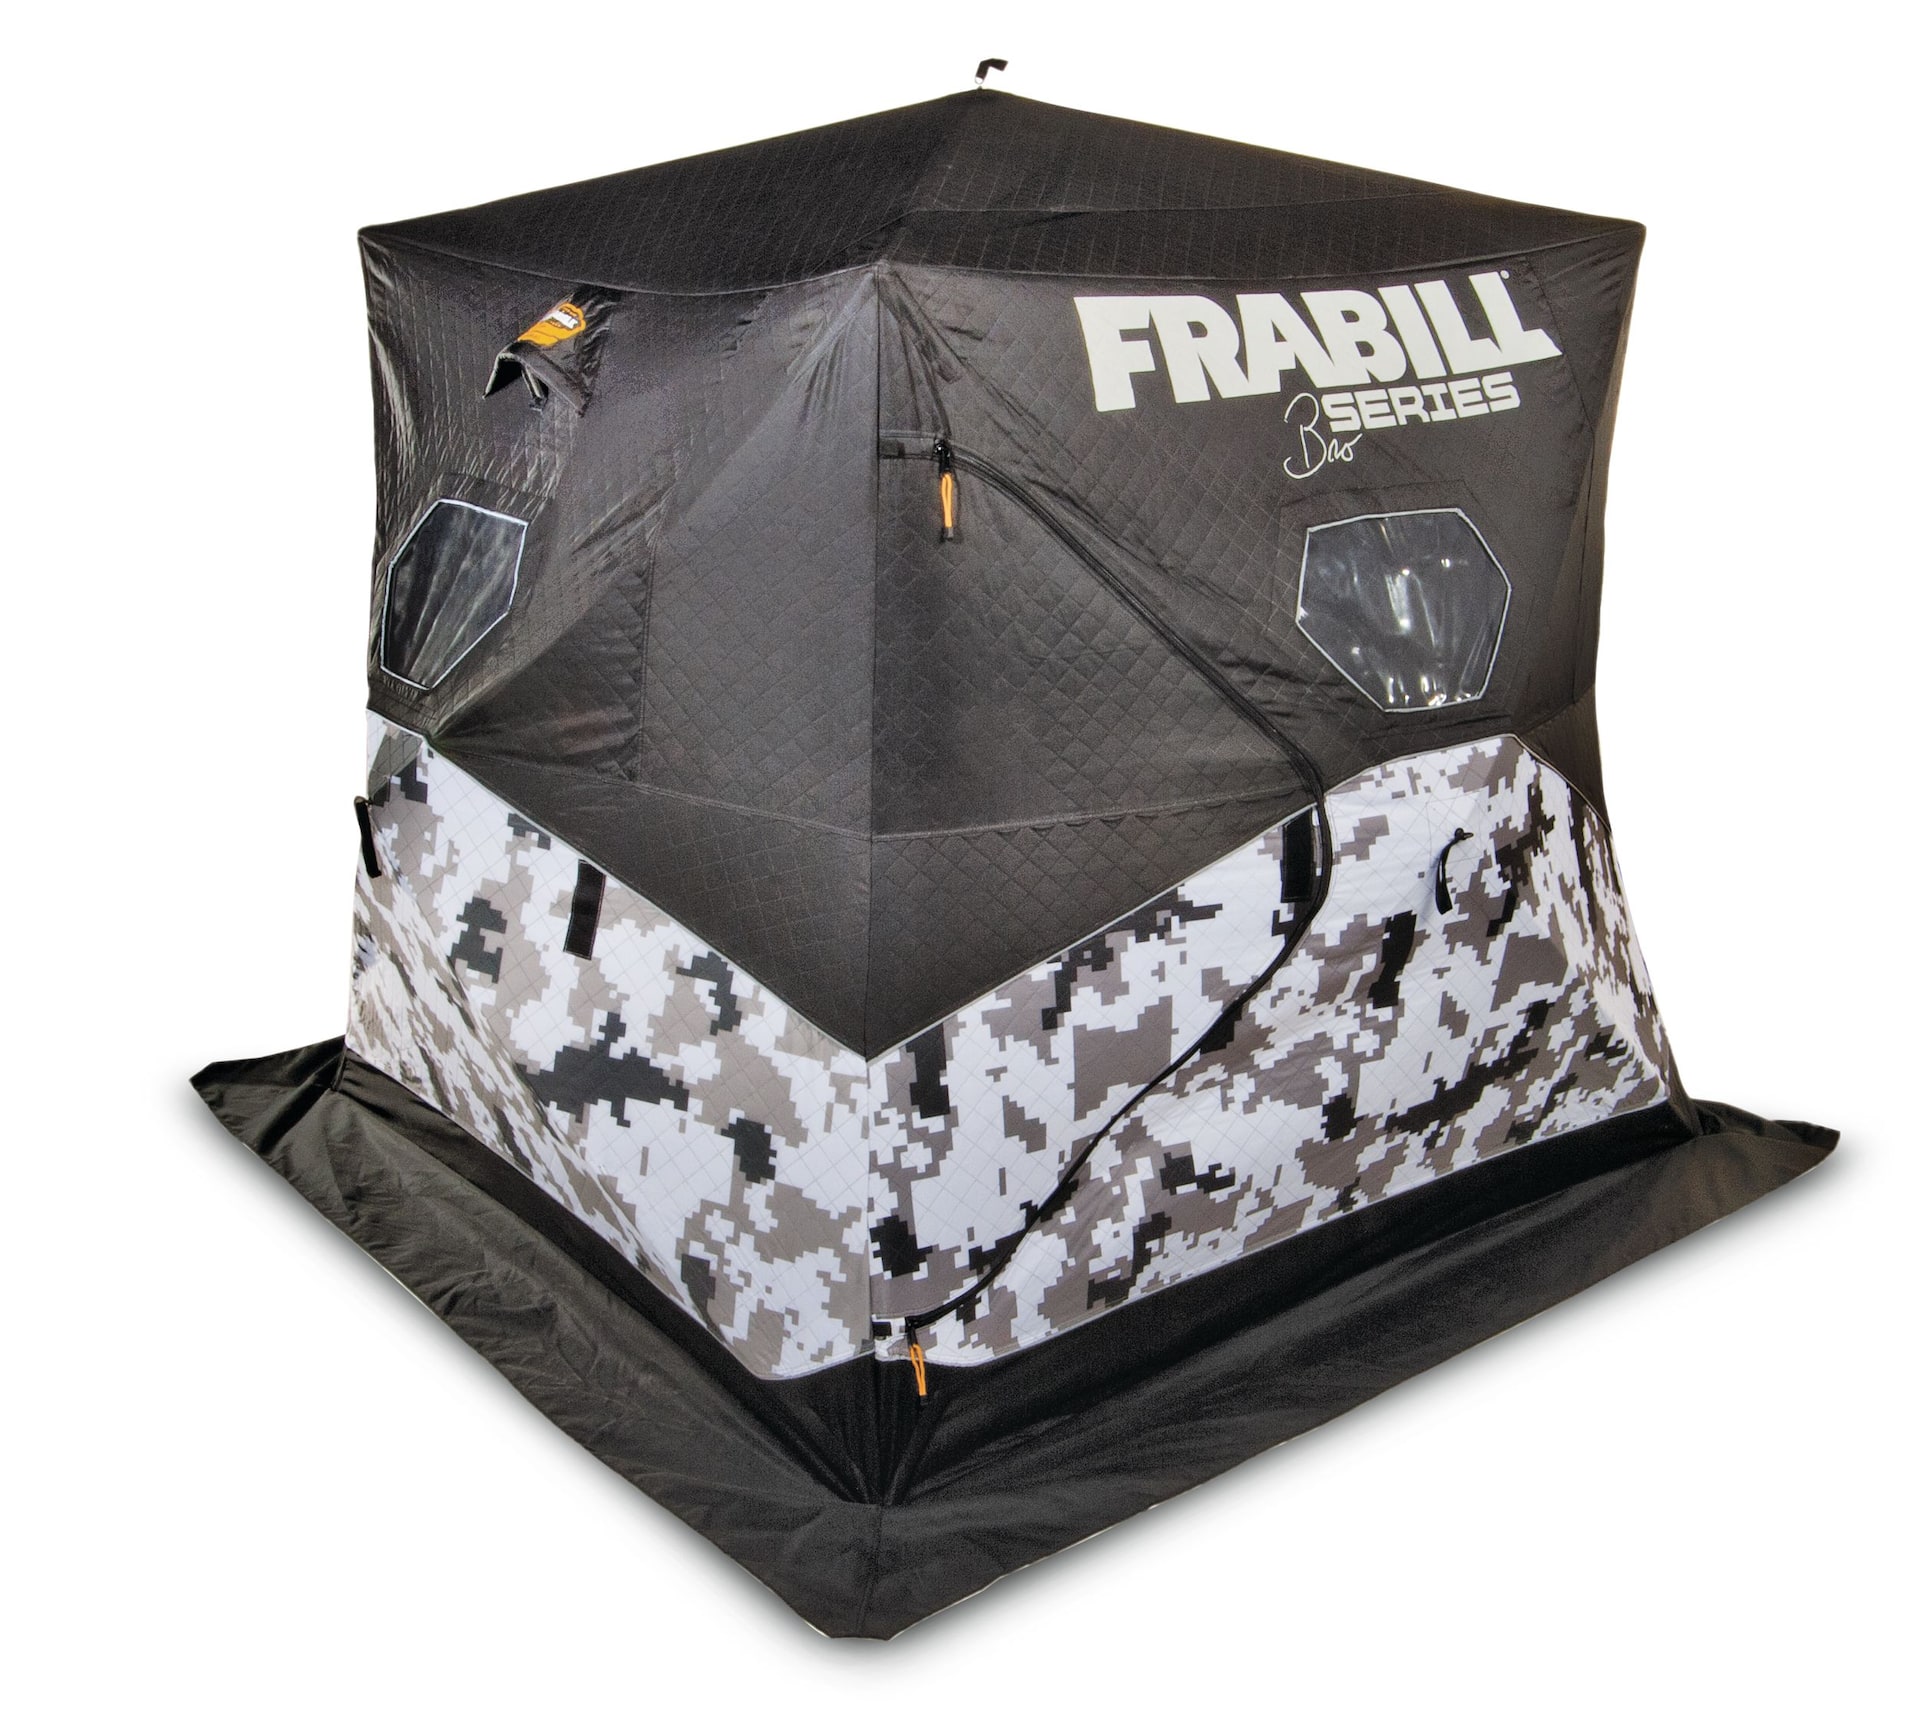 Frabill Bro Series Ice Shelter, 3-person